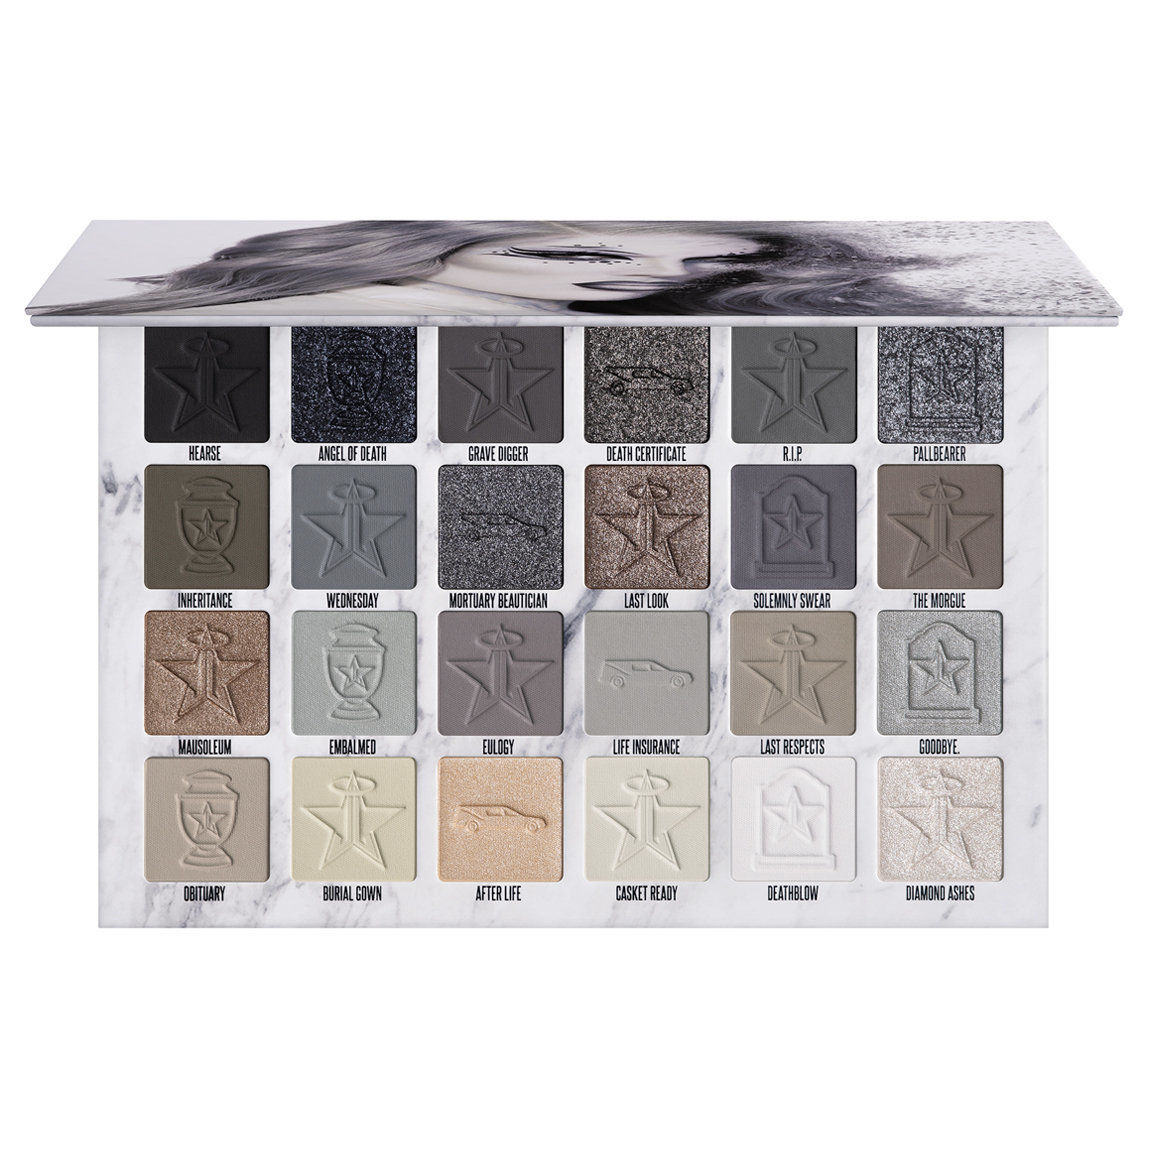 Jeffree Star Cosmetics Cremated Eyeshadow Palette alternative view 1 - product swatch.